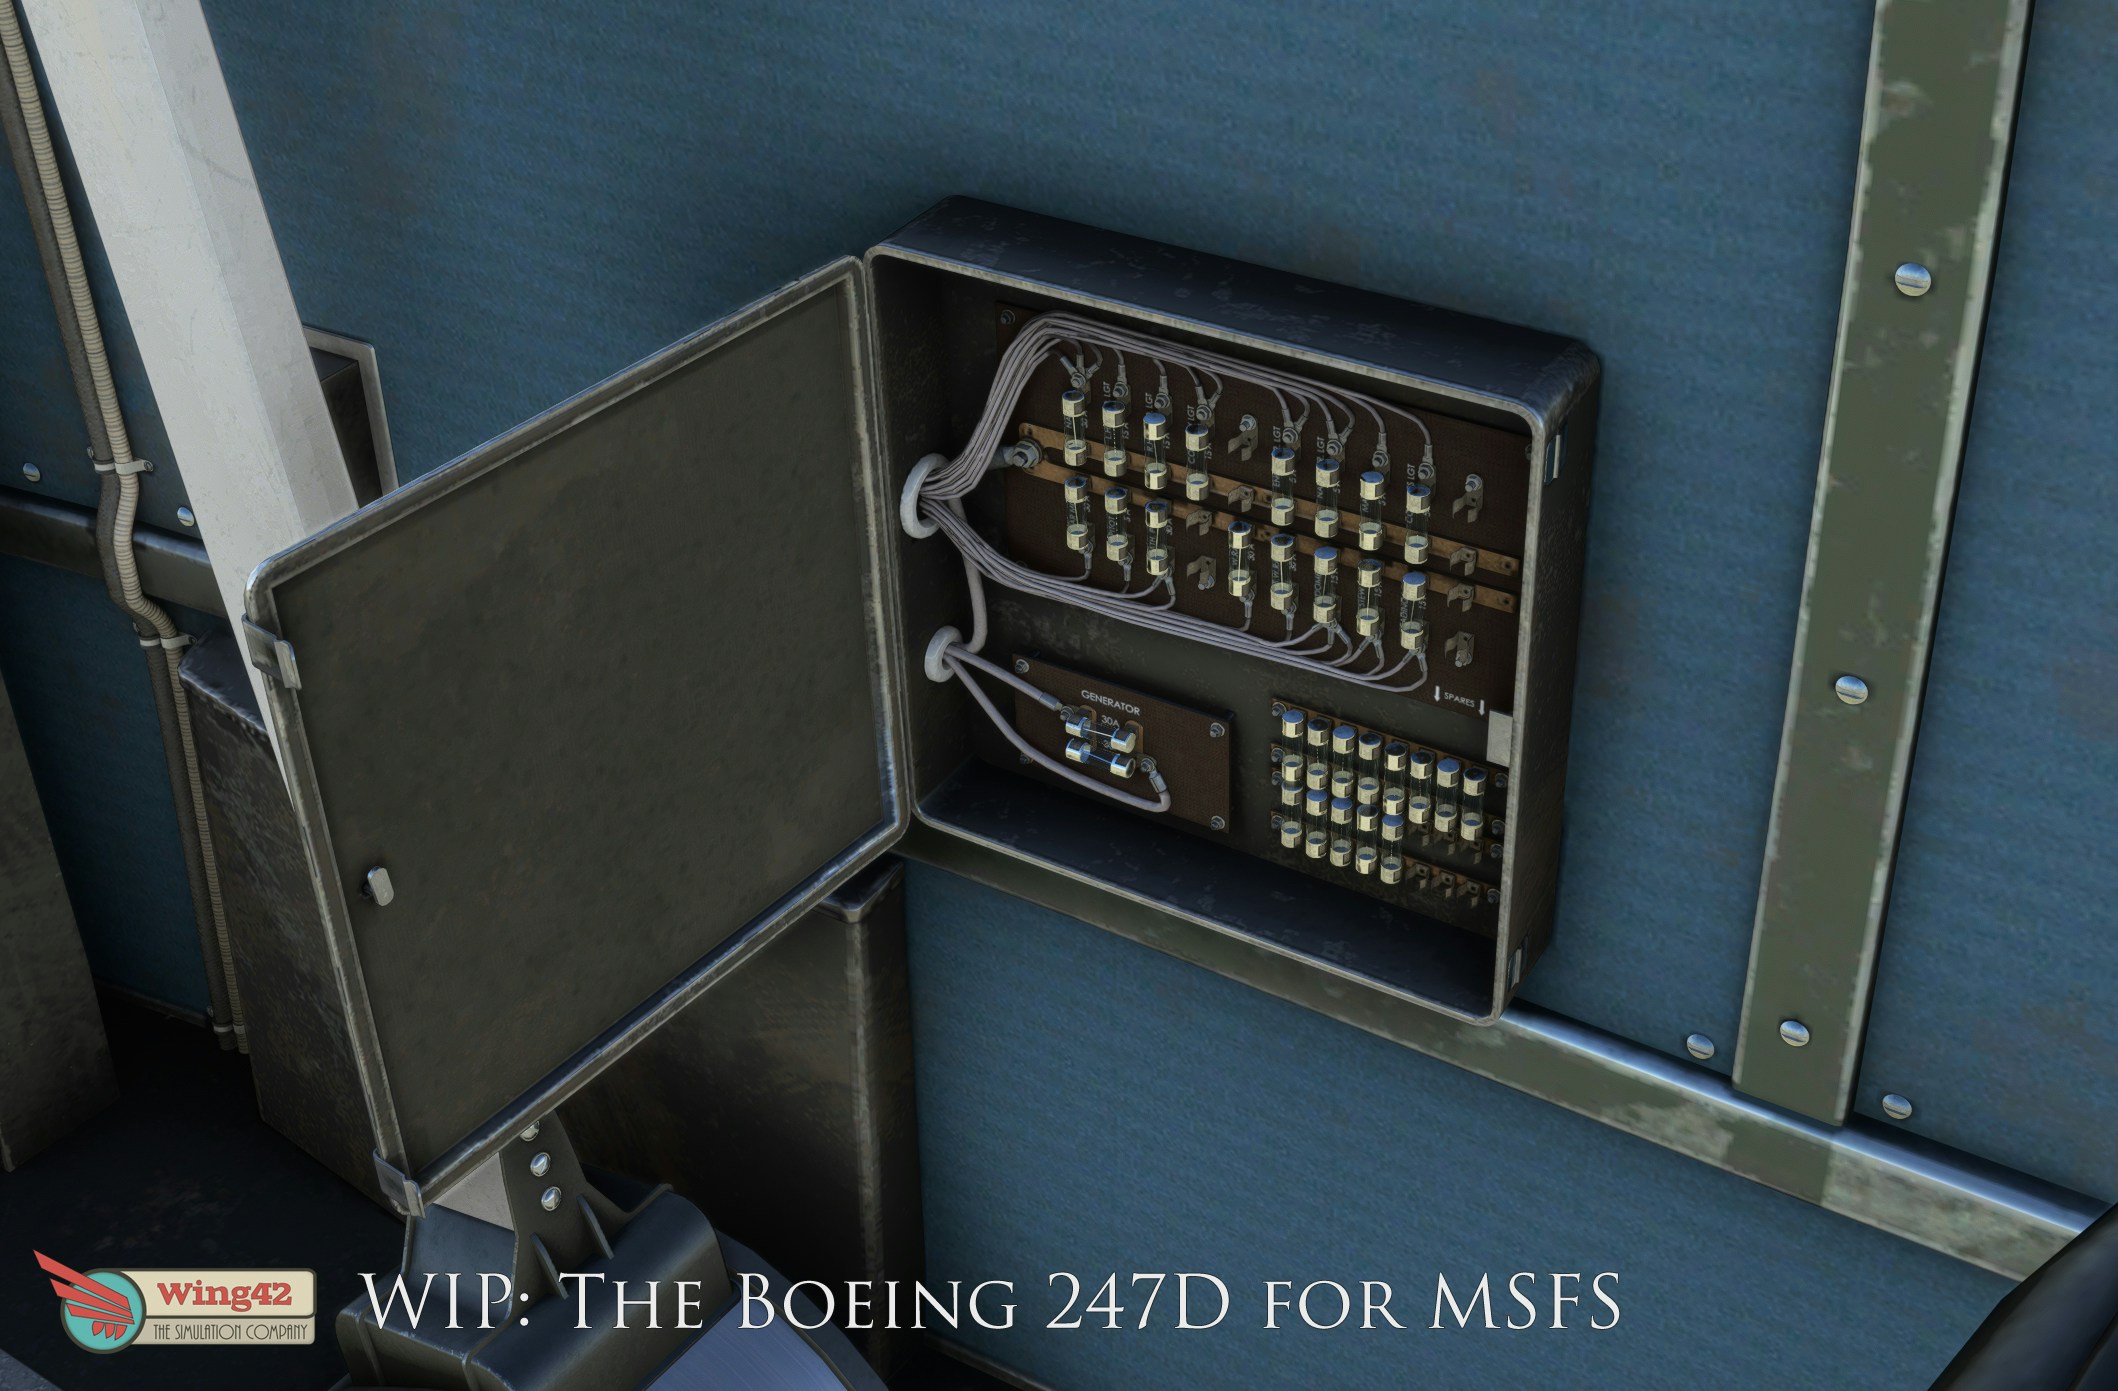 Wing42 Releases Boeing 247D for MSFS